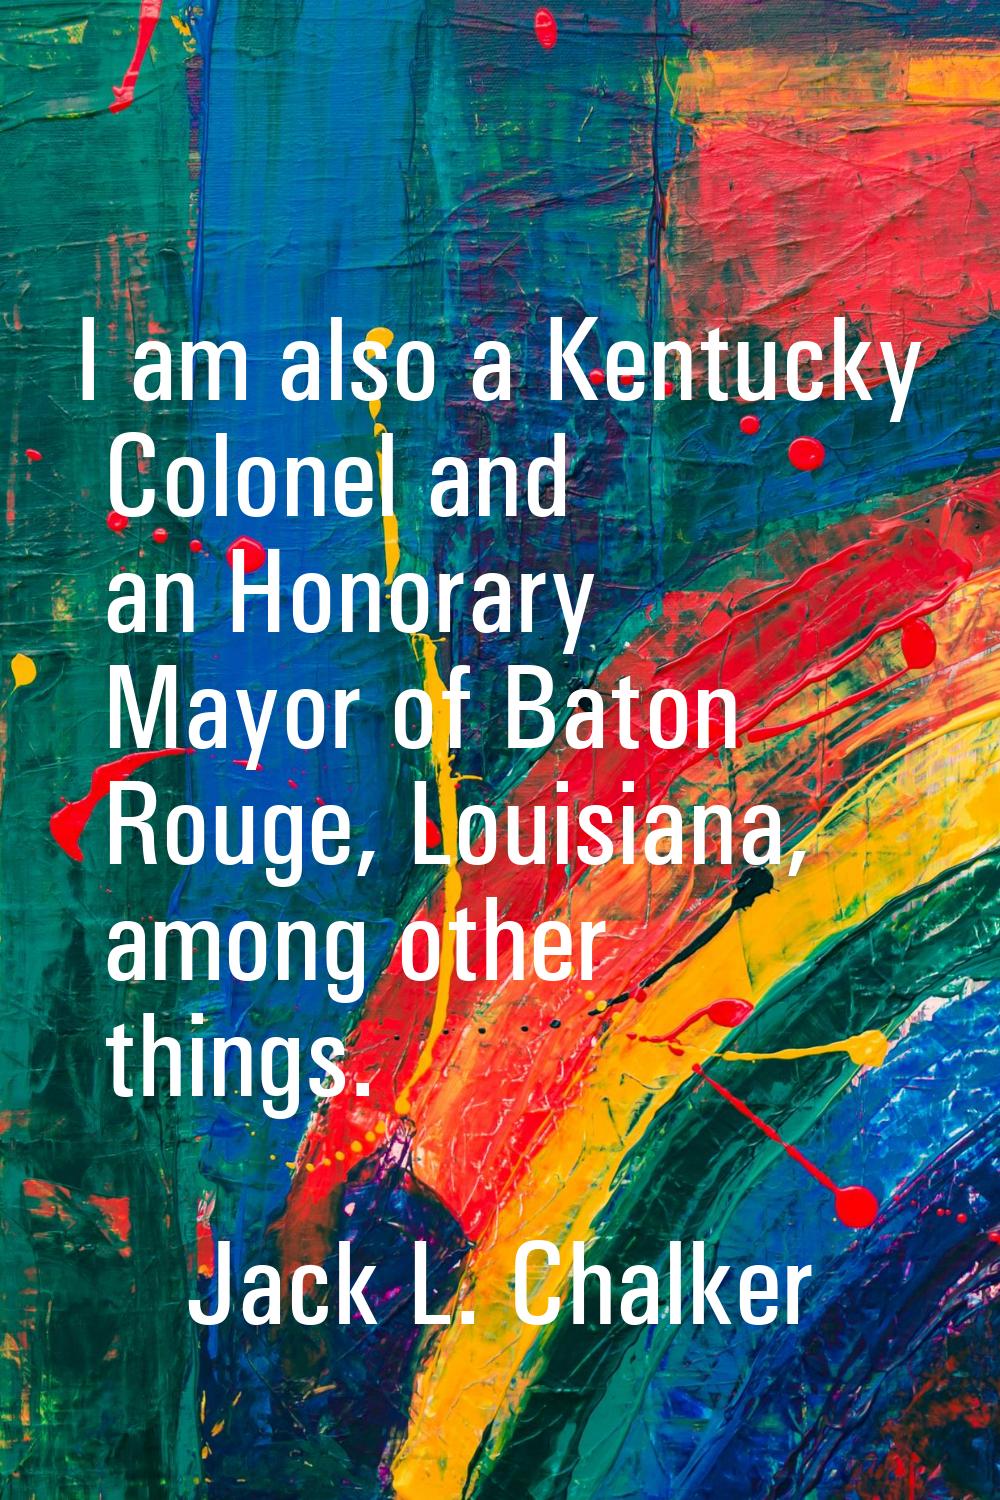 I am also a Kentucky Colonel and an Honorary Mayor of Baton Rouge, Louisiana, among other things.